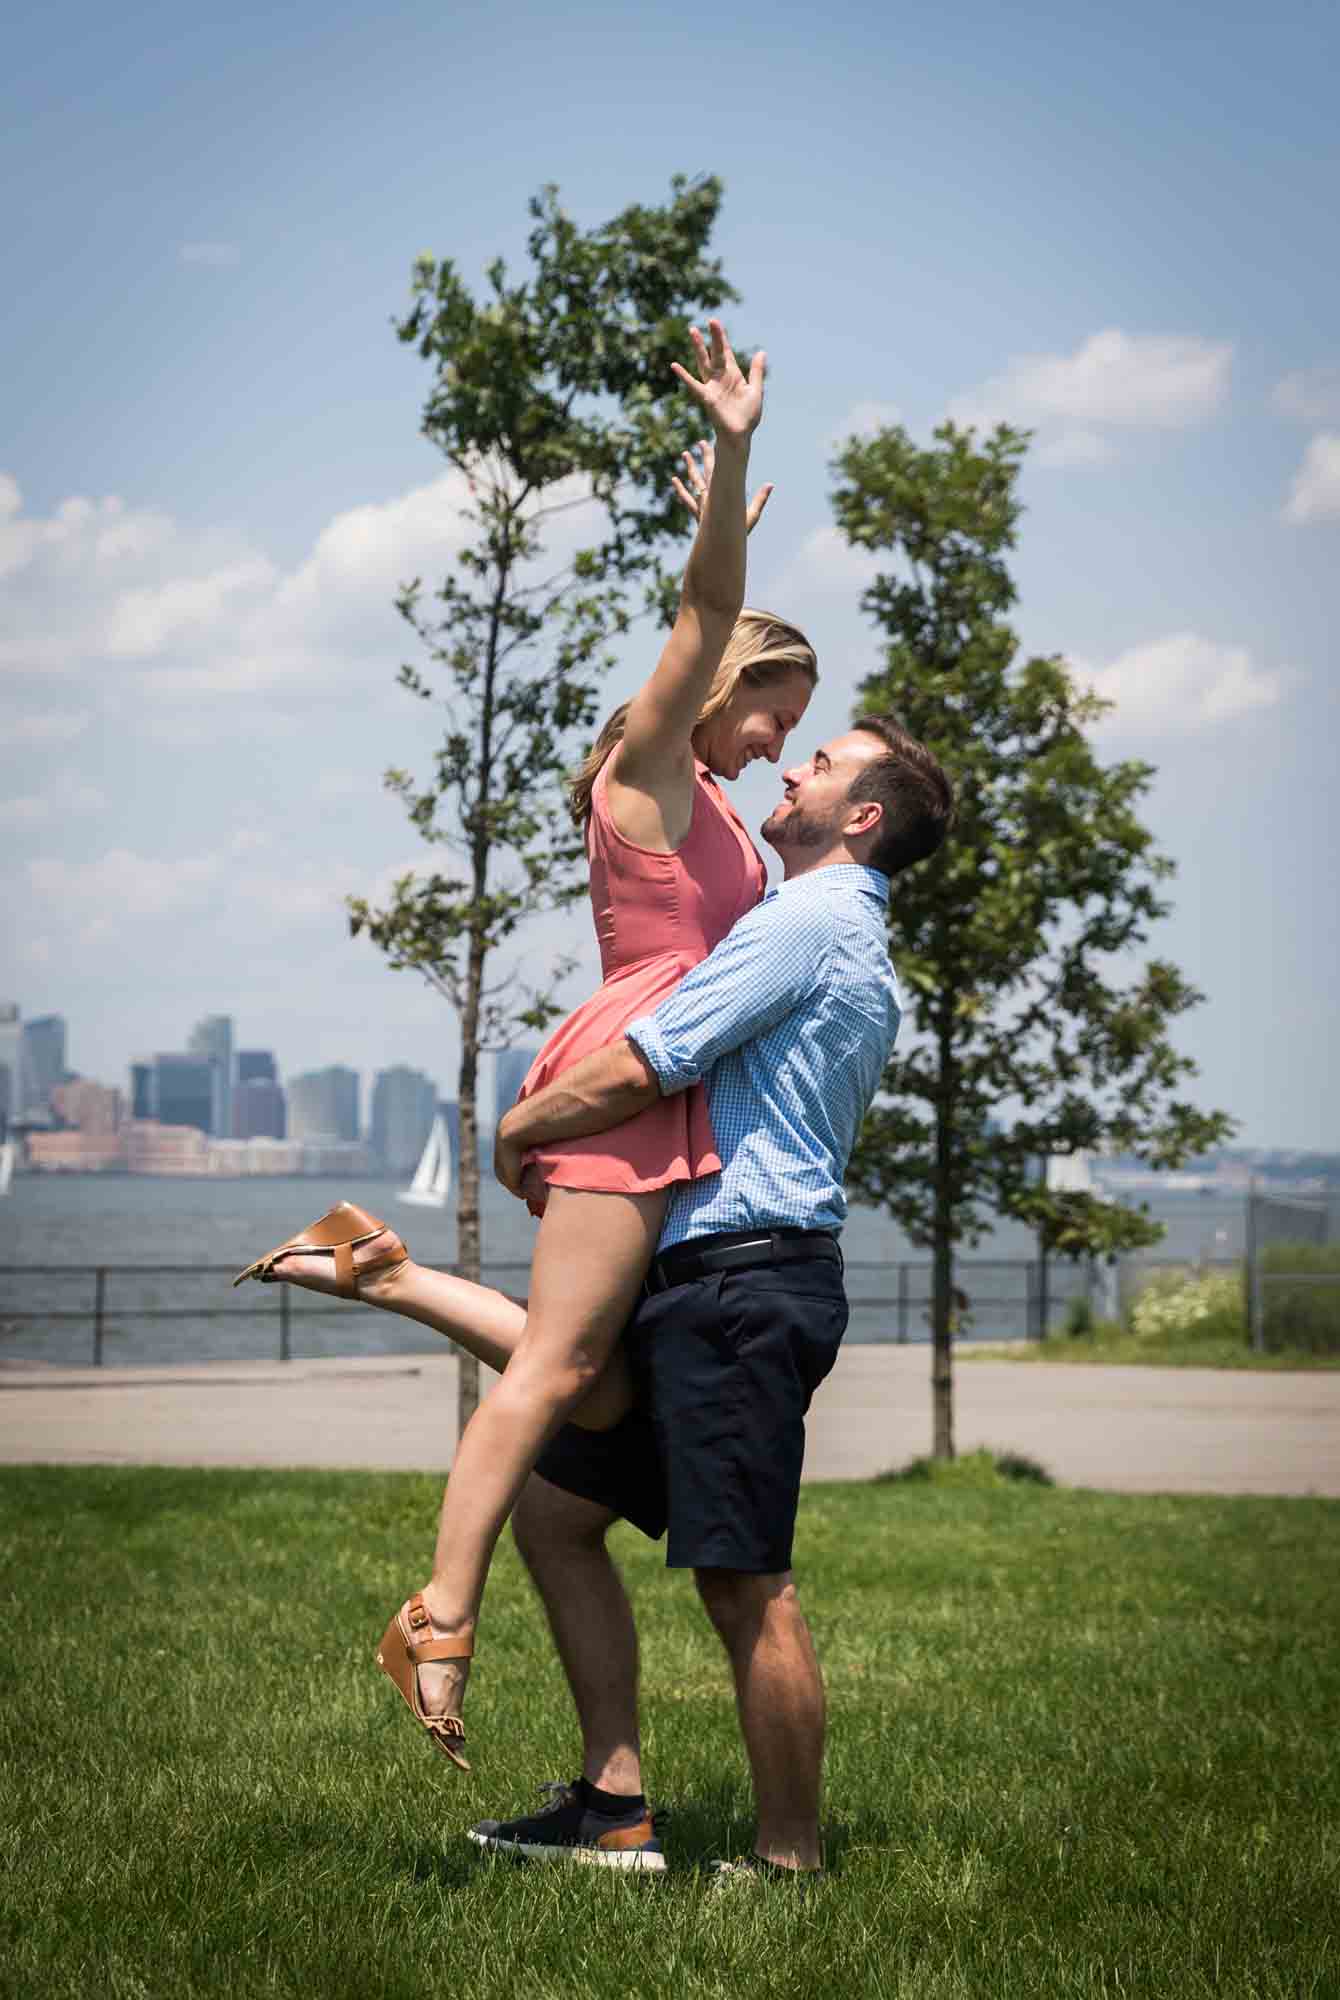 Man lifting up woman on the Play Lawns for an article on how to propose on Governors Island